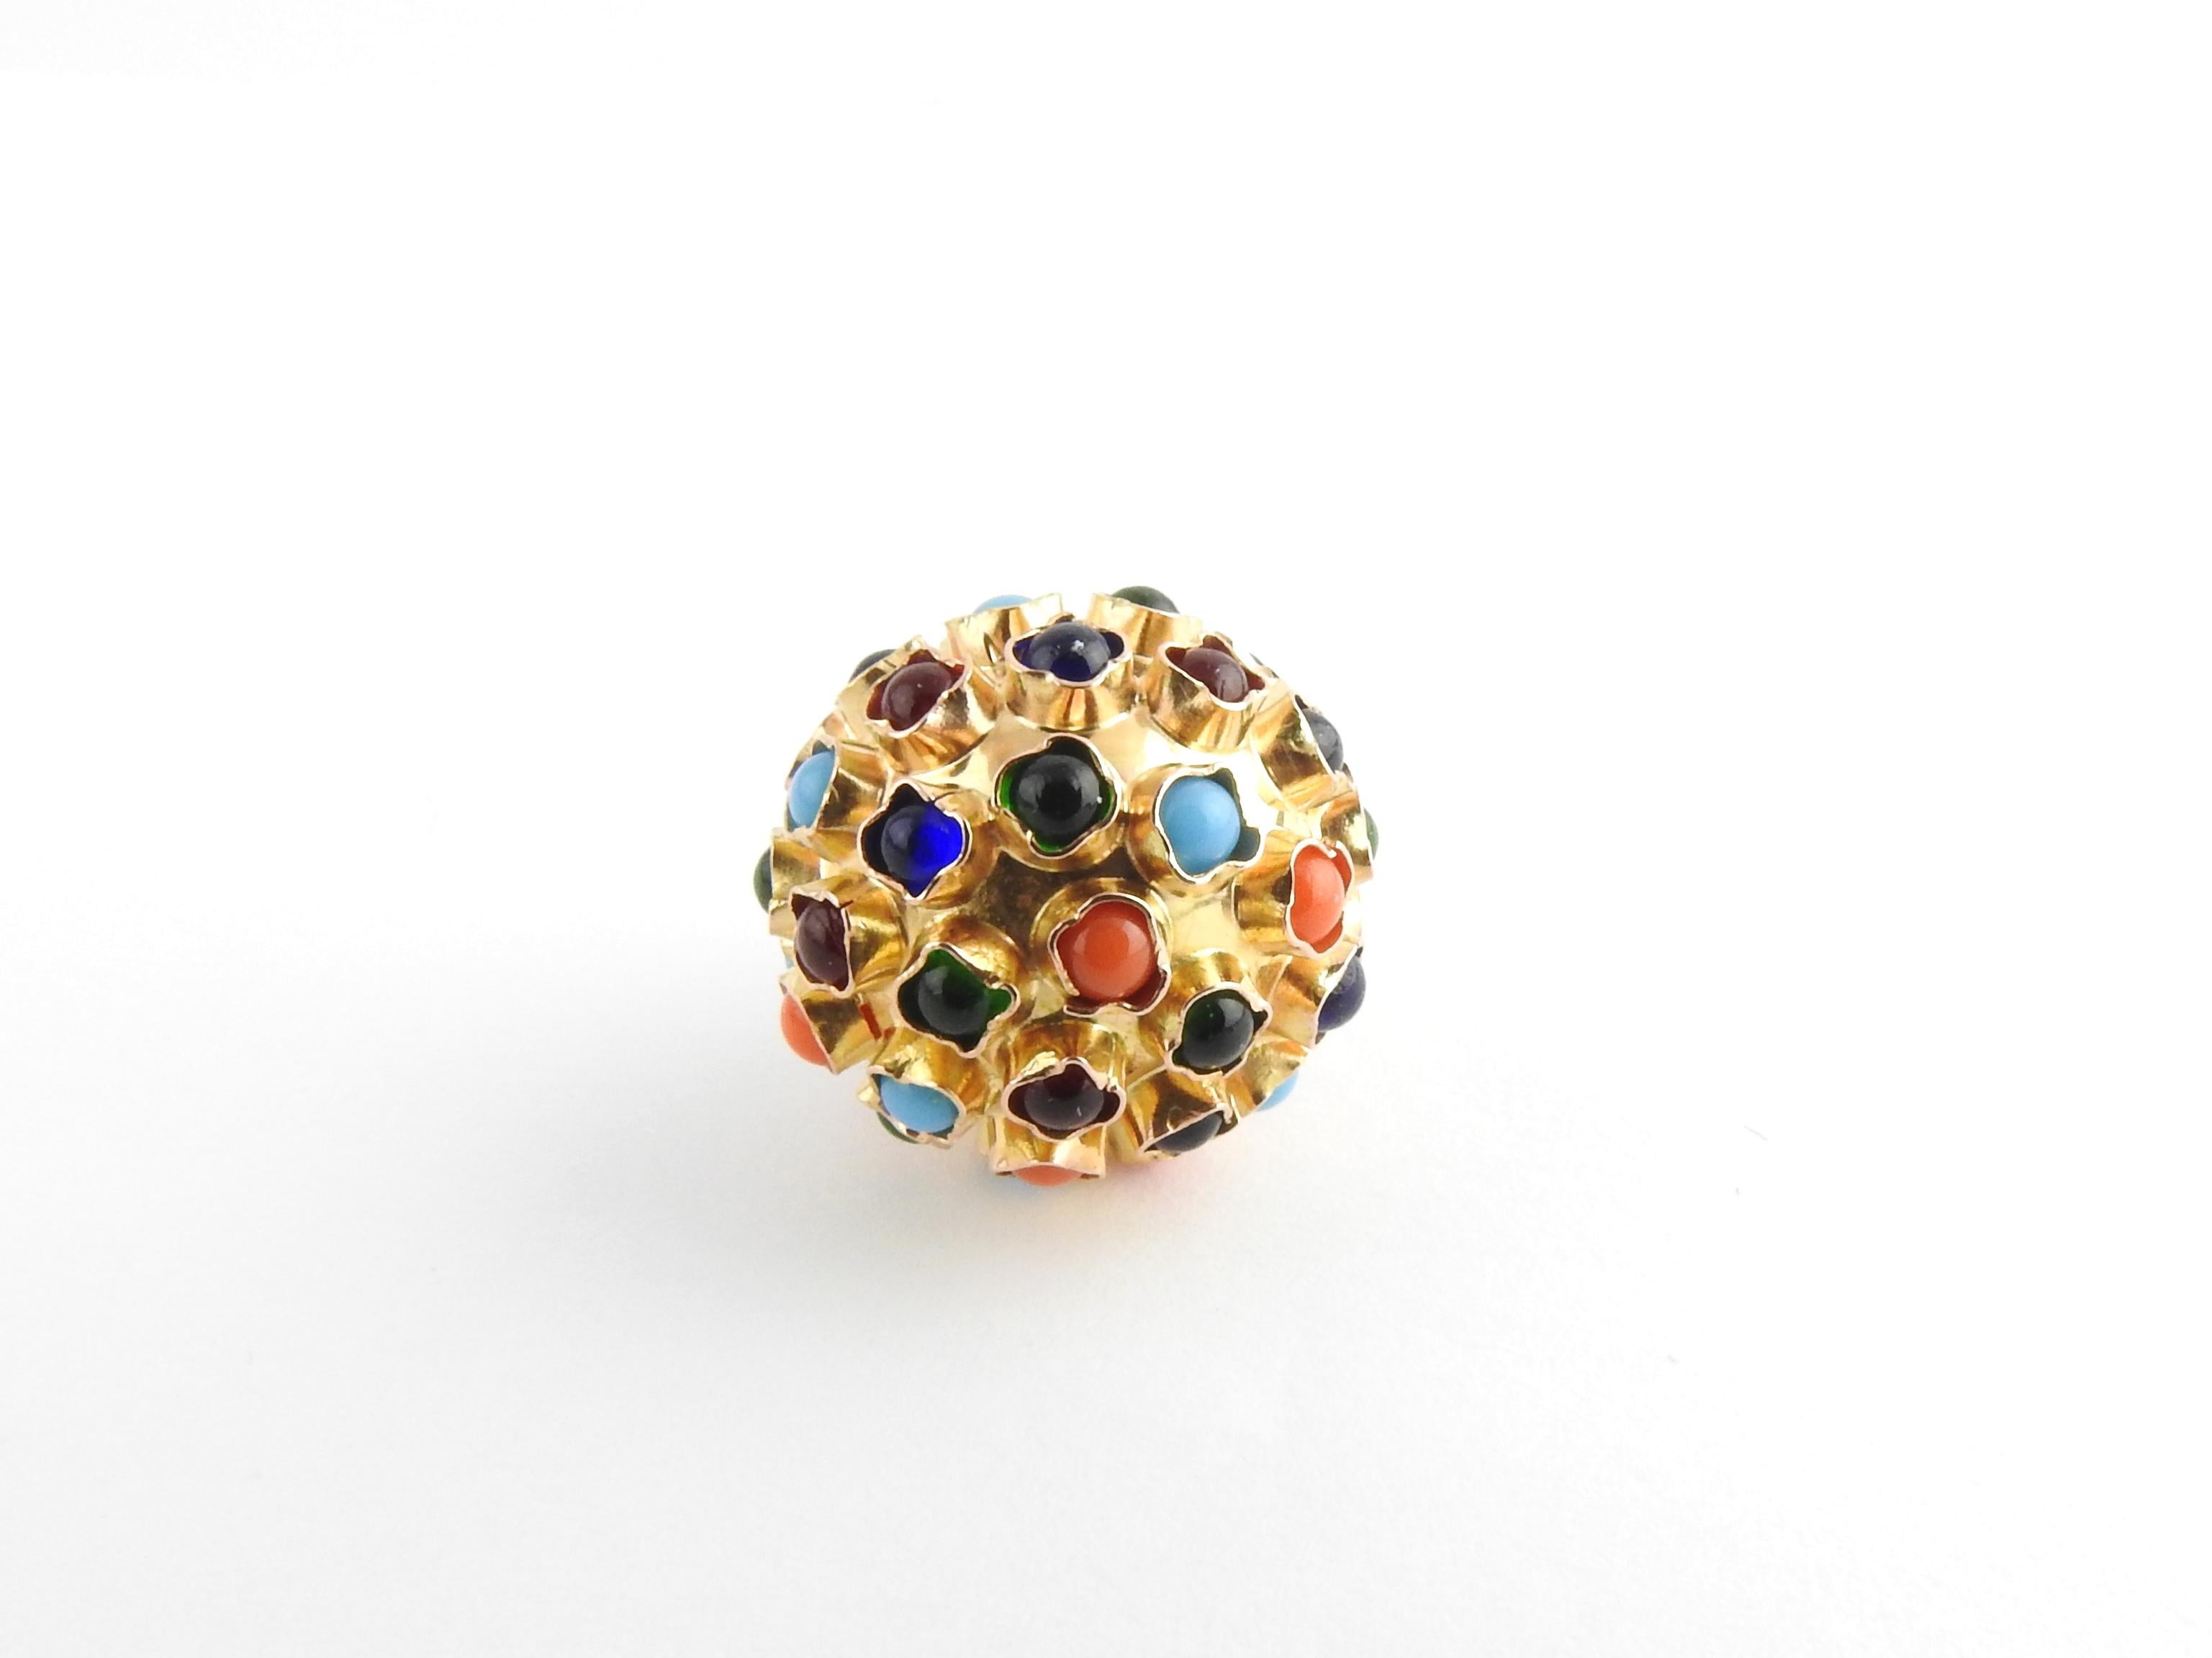 Vintage 18 Karat Yellow Gold Multi Stone Sputnik Charm

This lovely 3D sputnik charm is decorated with multicolored stones and crafted in beautifully detailed 18K yellow gold.

Size: 17 mm (actual charm)

Weight: 3.4 dwt. / 5.4 gr.

Acid tested for